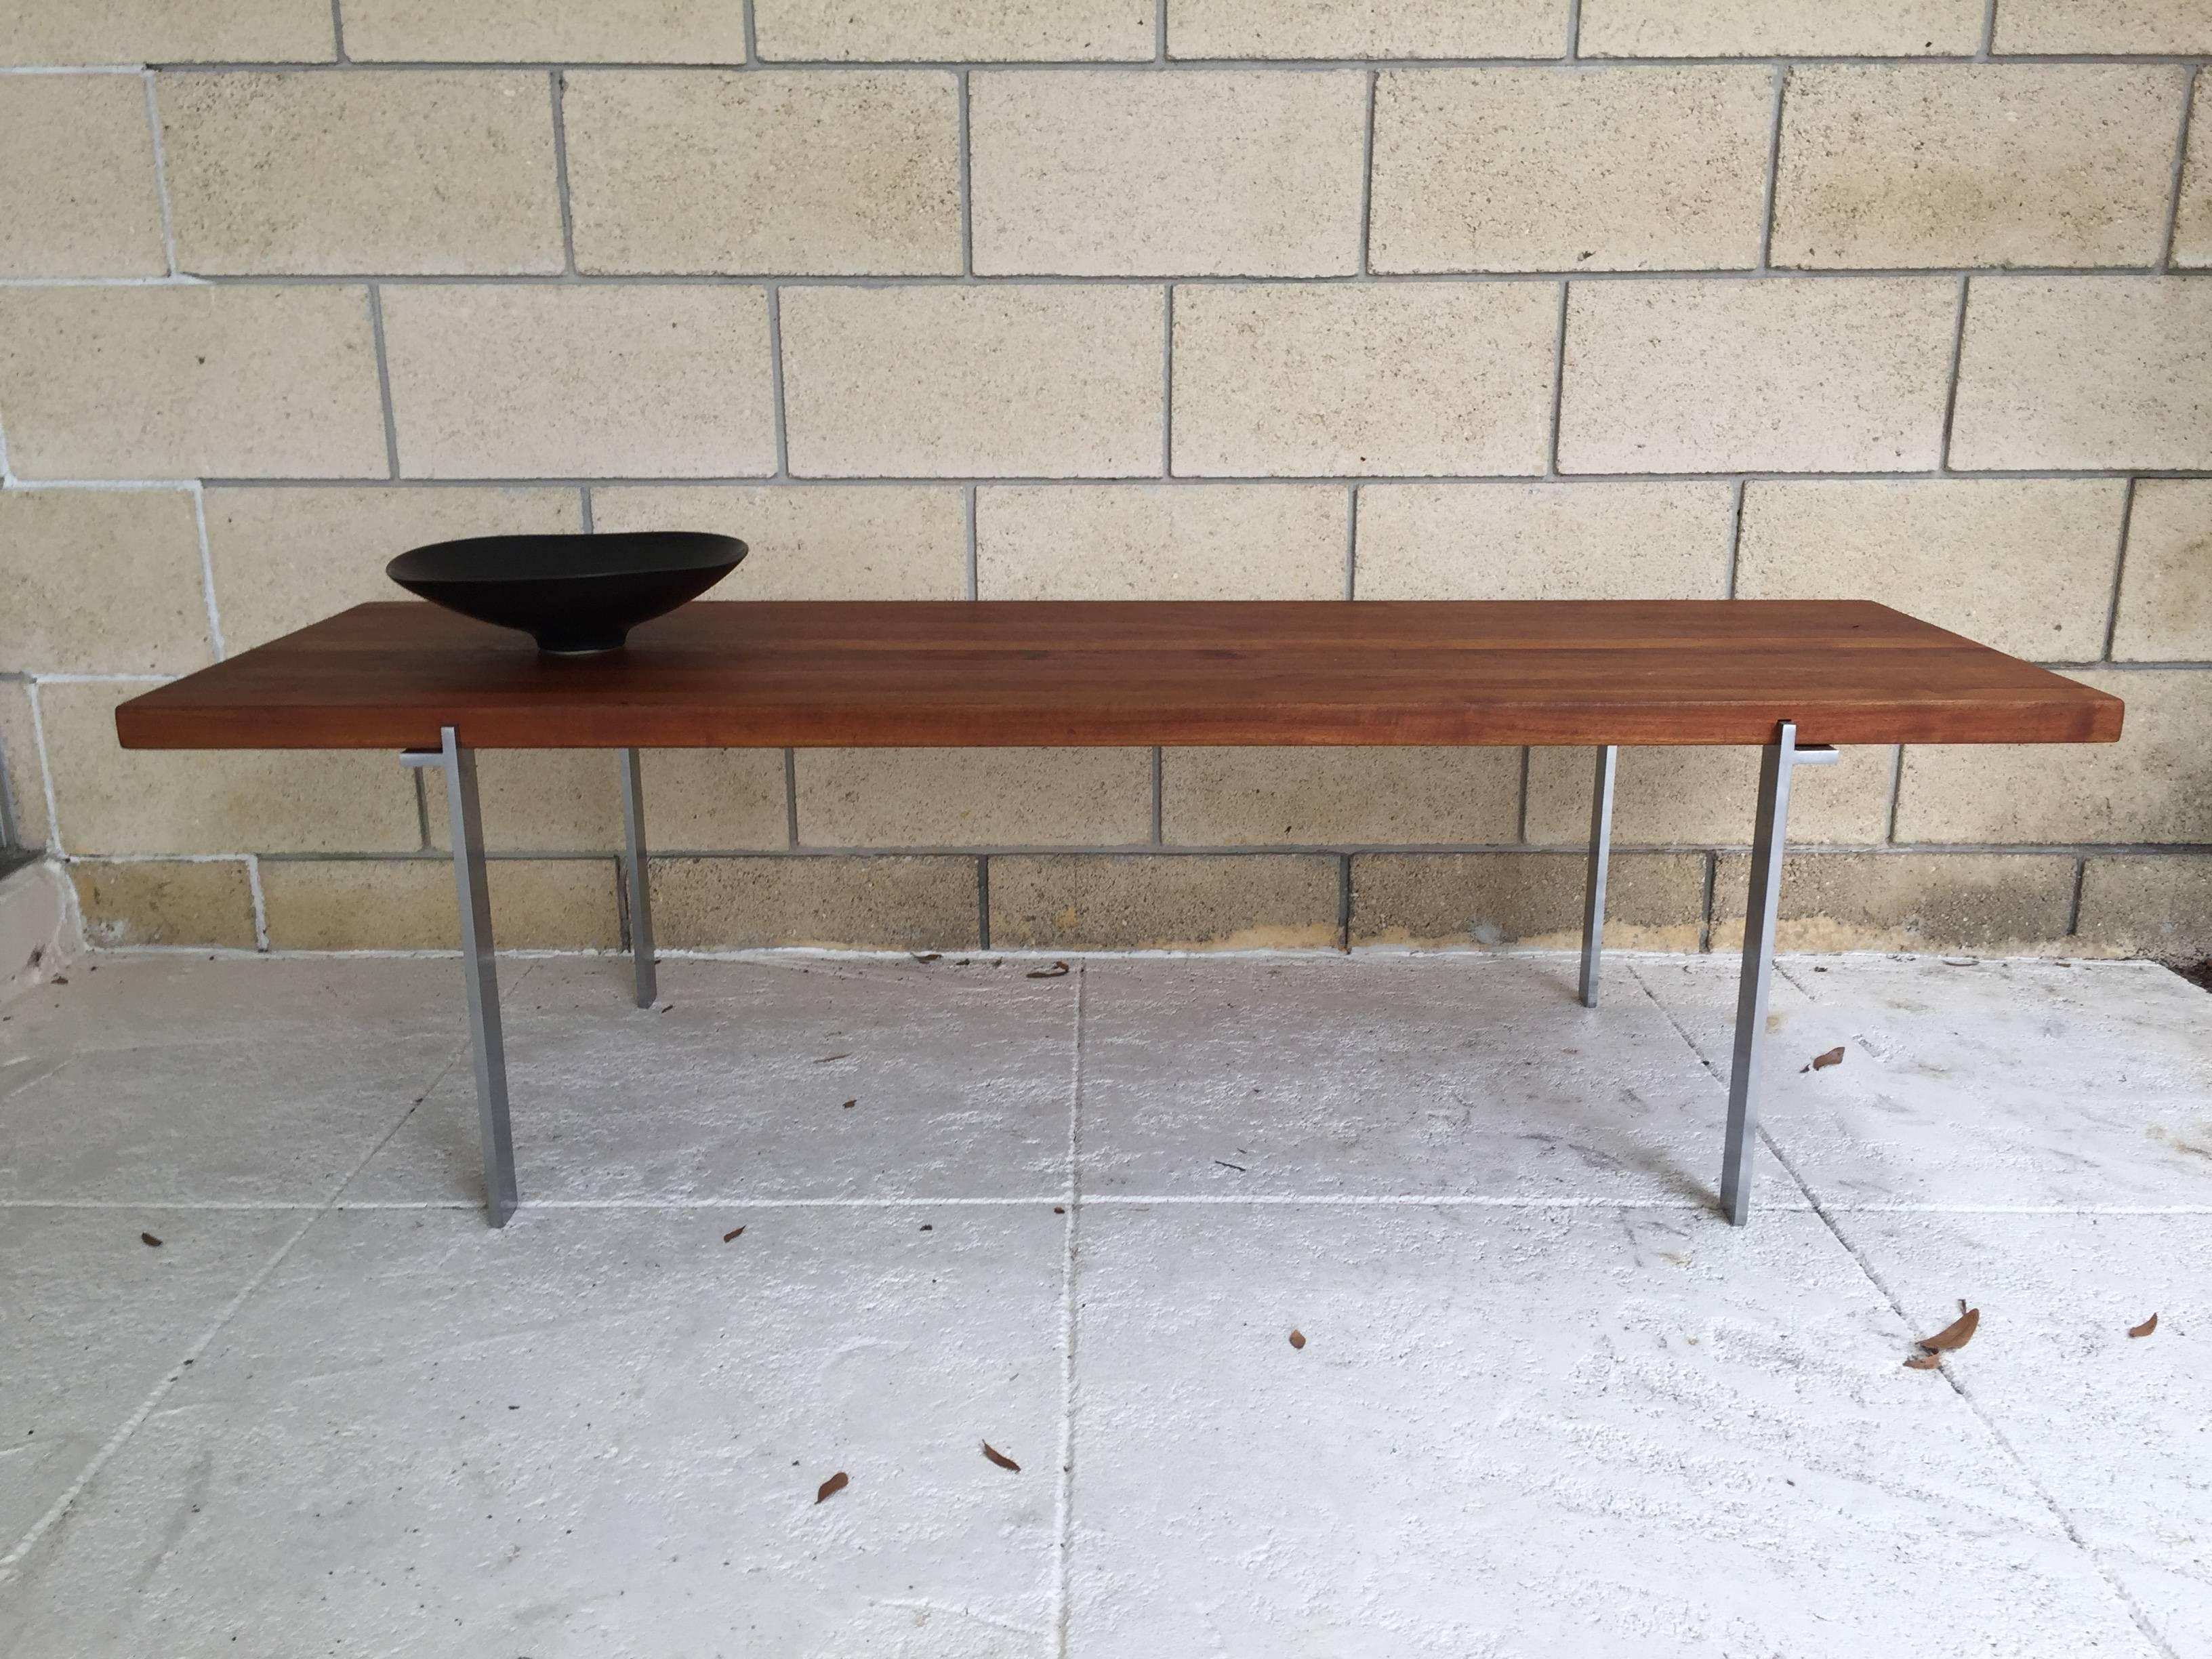 Beautiful Minimalist solid teak and stainless steel coffee table in the manner of Poul Kjaerholm or Illum Wikkelso. Maker is unknown. The table is in original condition and made of thick solid teak planks with stainless steel legs. Some wear on the